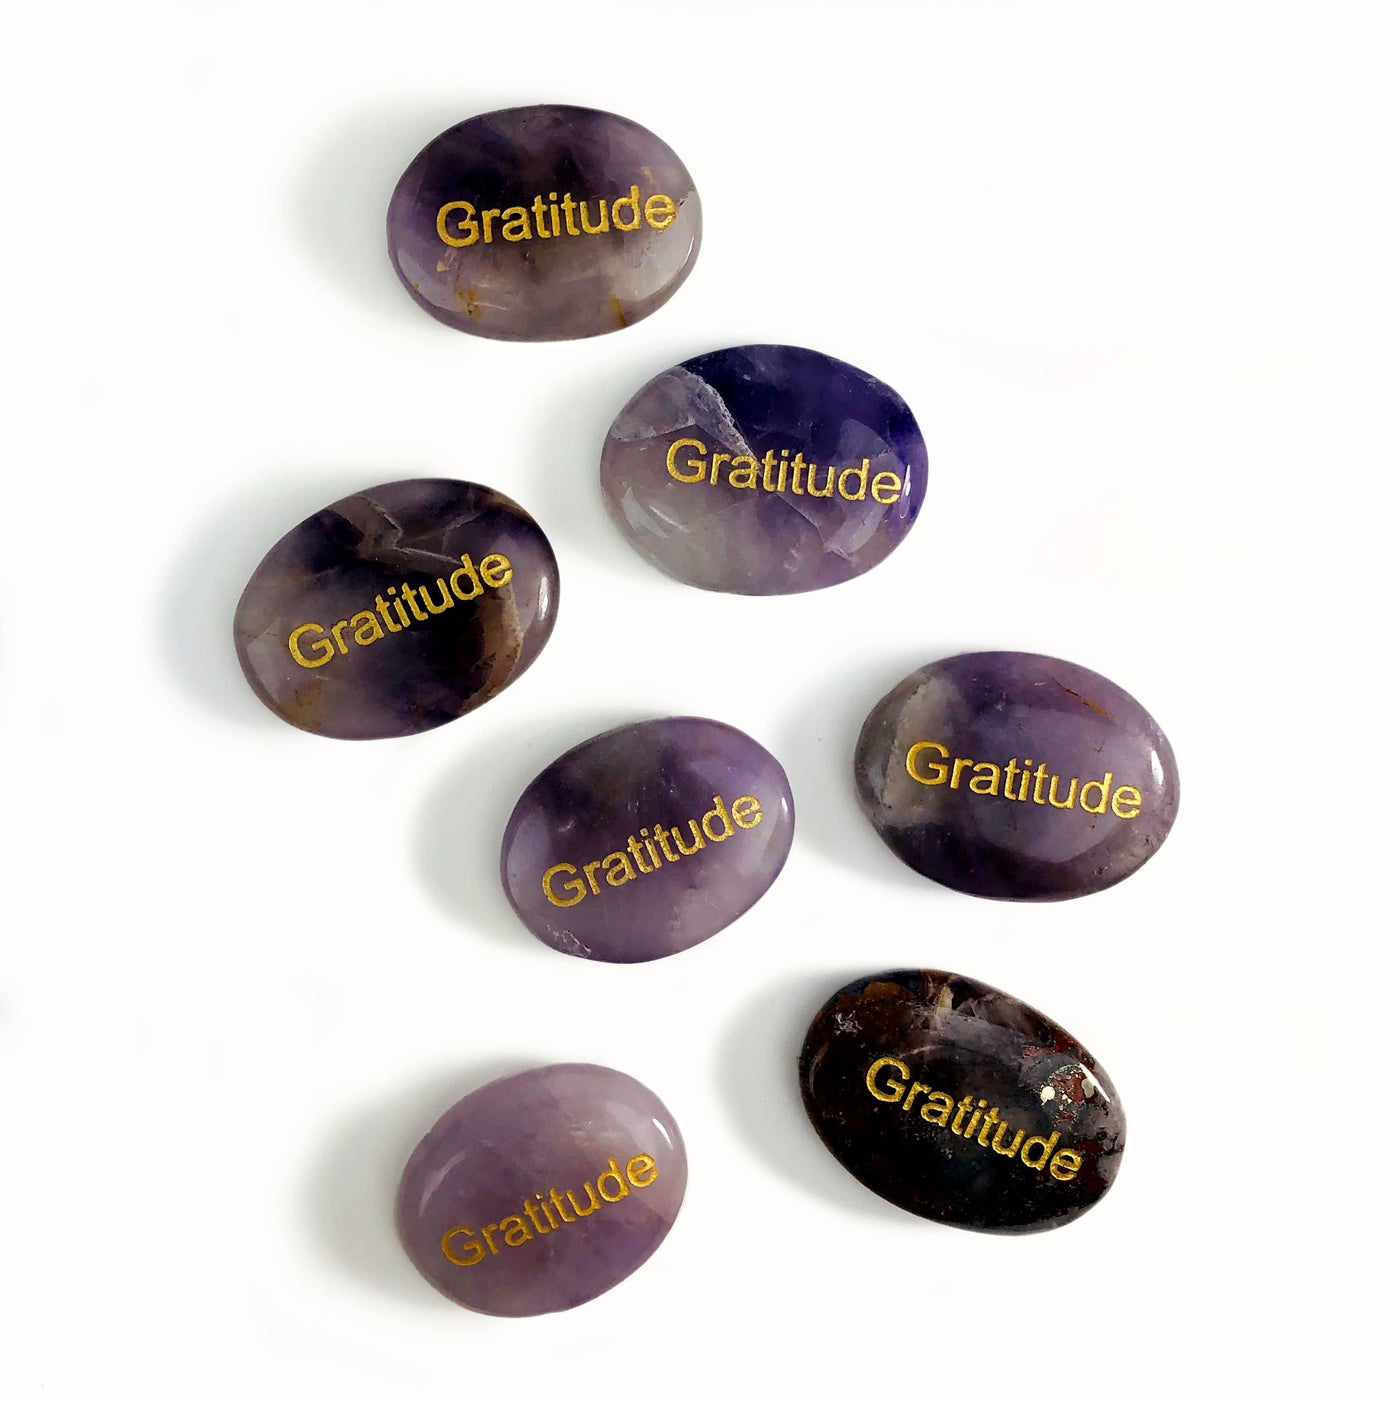 Seven Amethyst "Gratitude" Pocket Palm Stones laid out on a white surface.